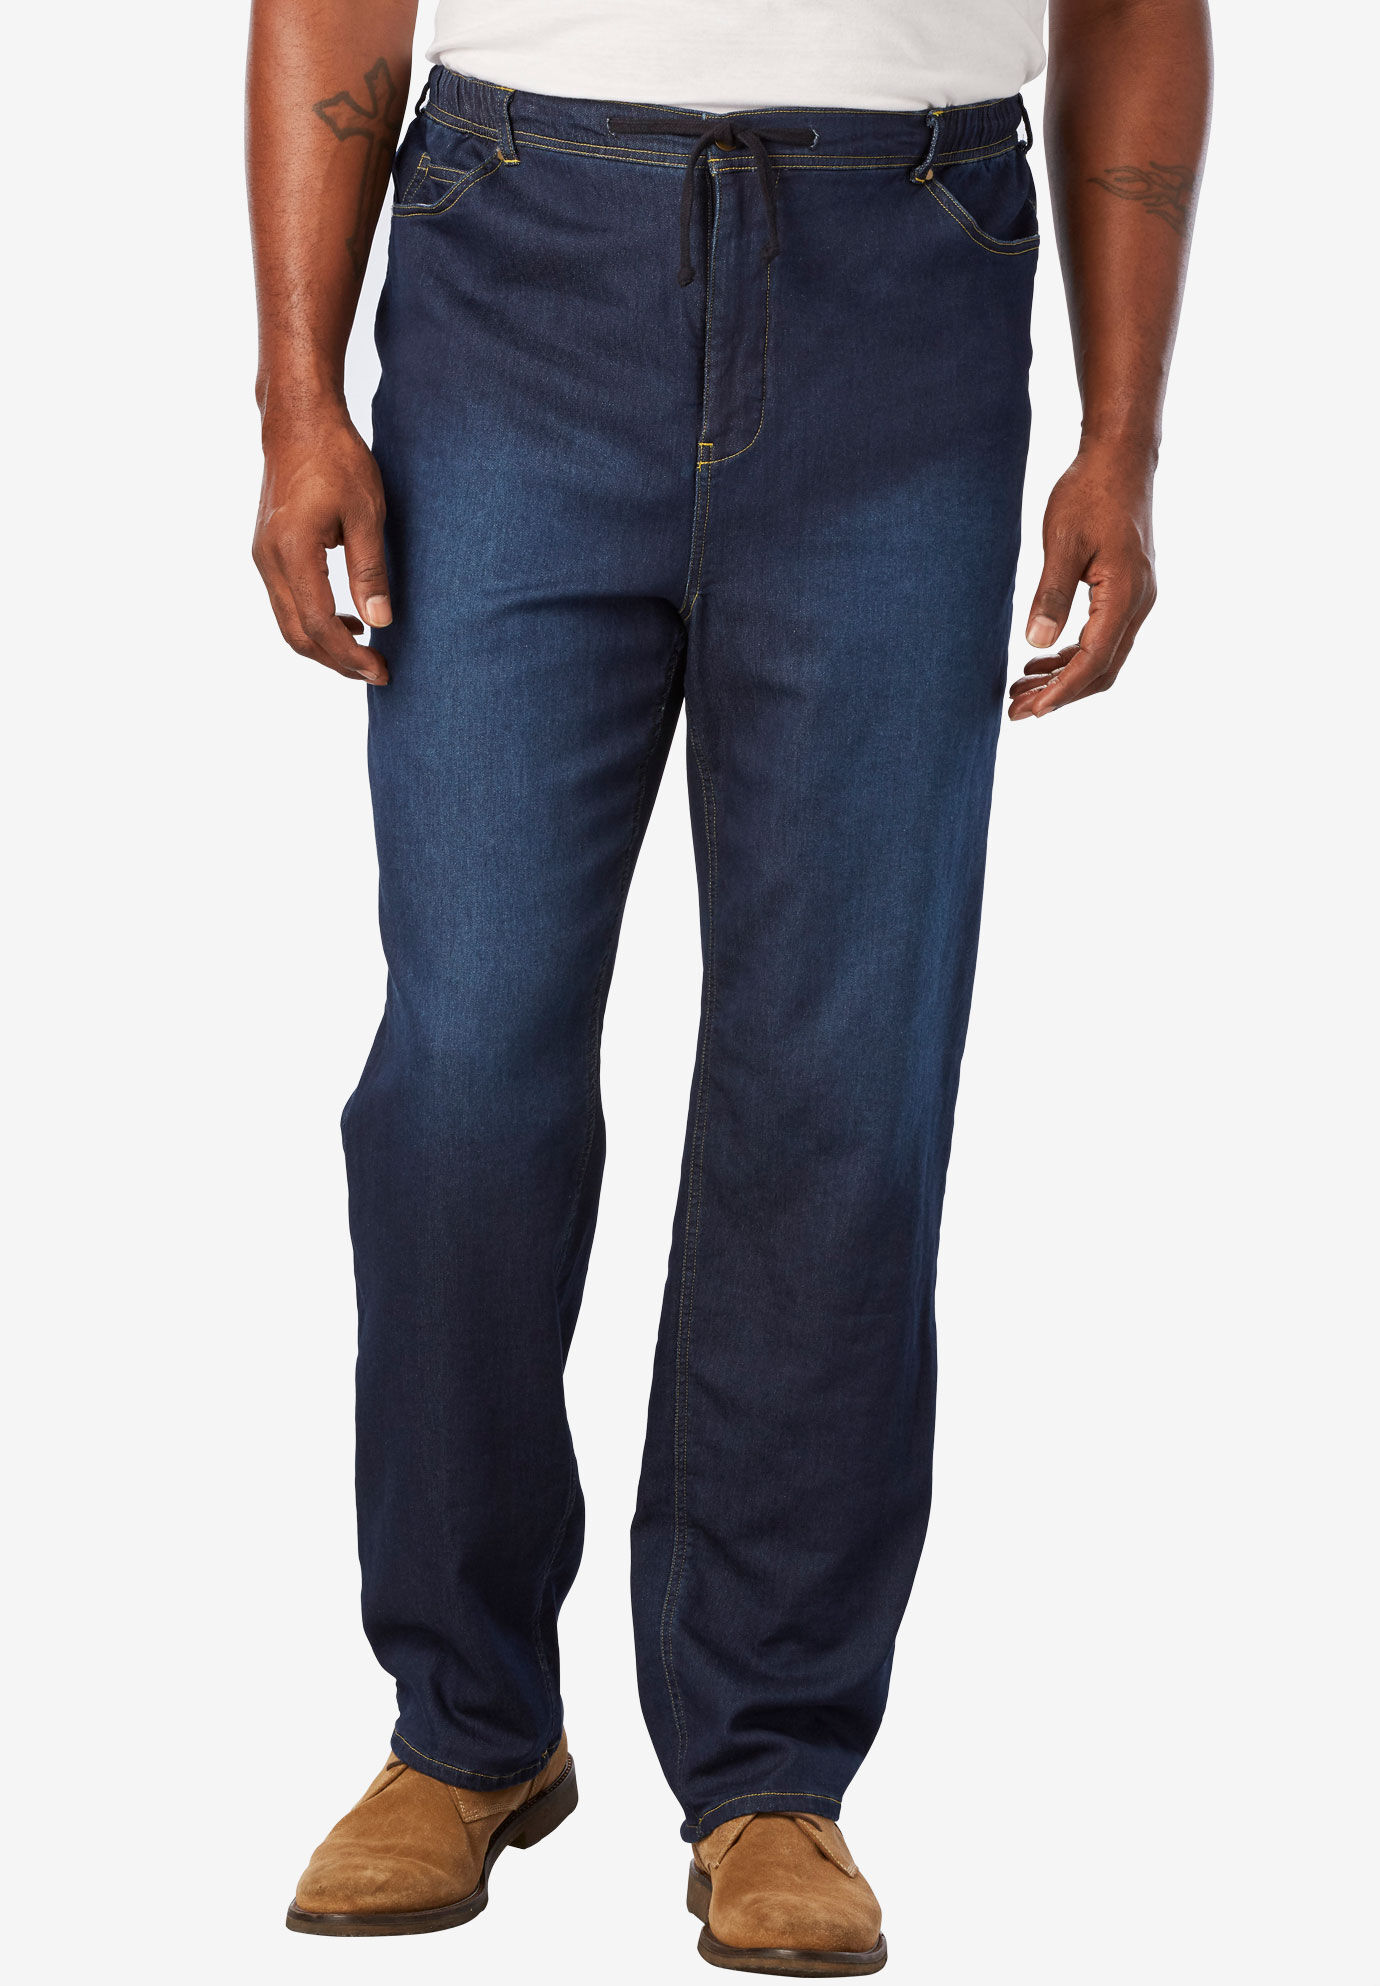 jogging pants that look like jeans